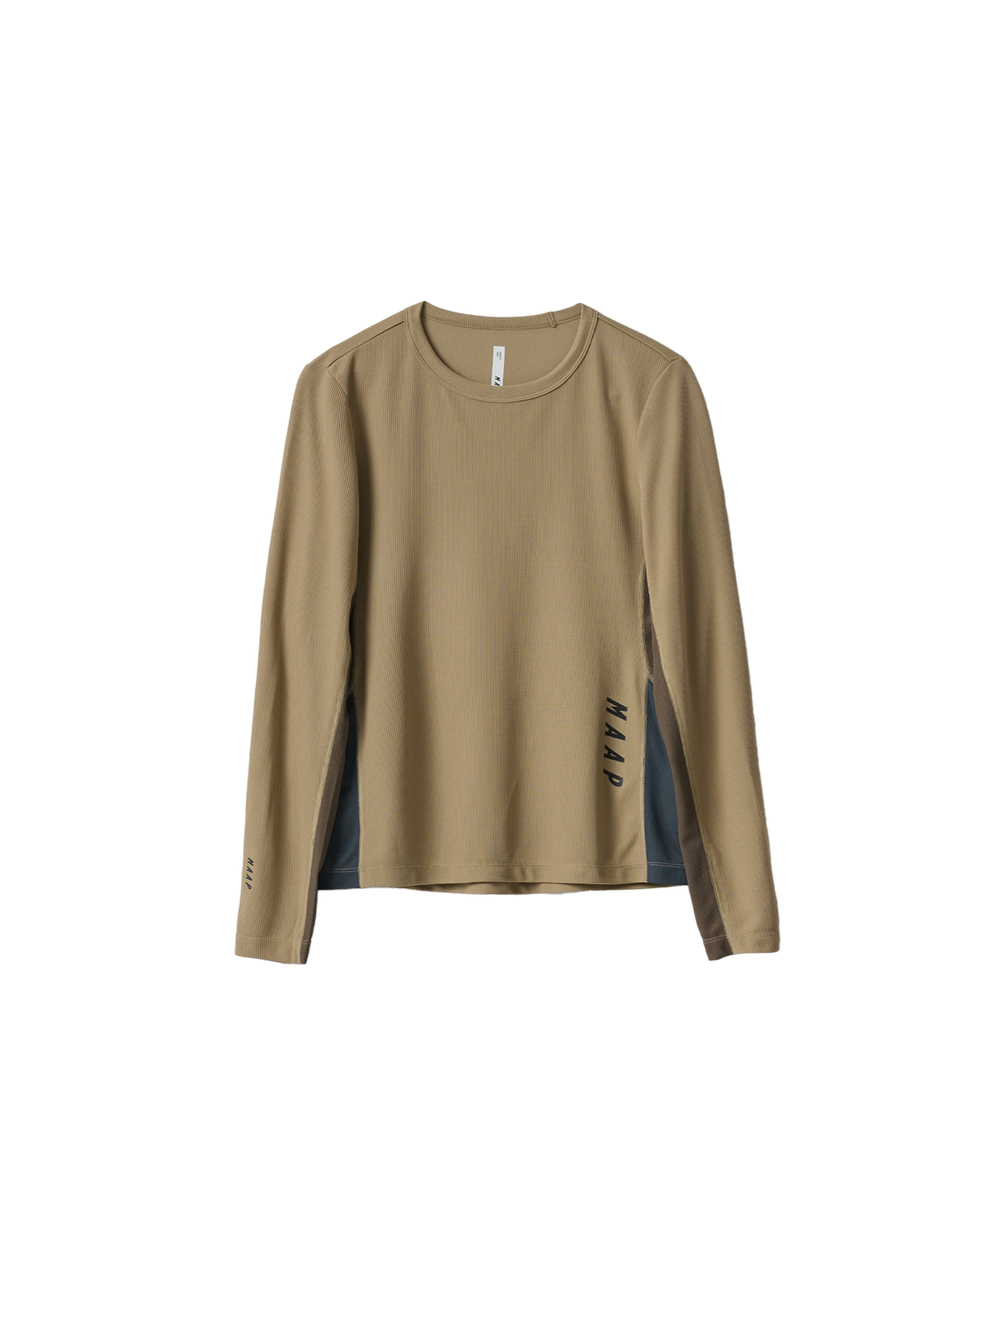 Product Image for Women's Alt_Road Ride LS Tee 3.0